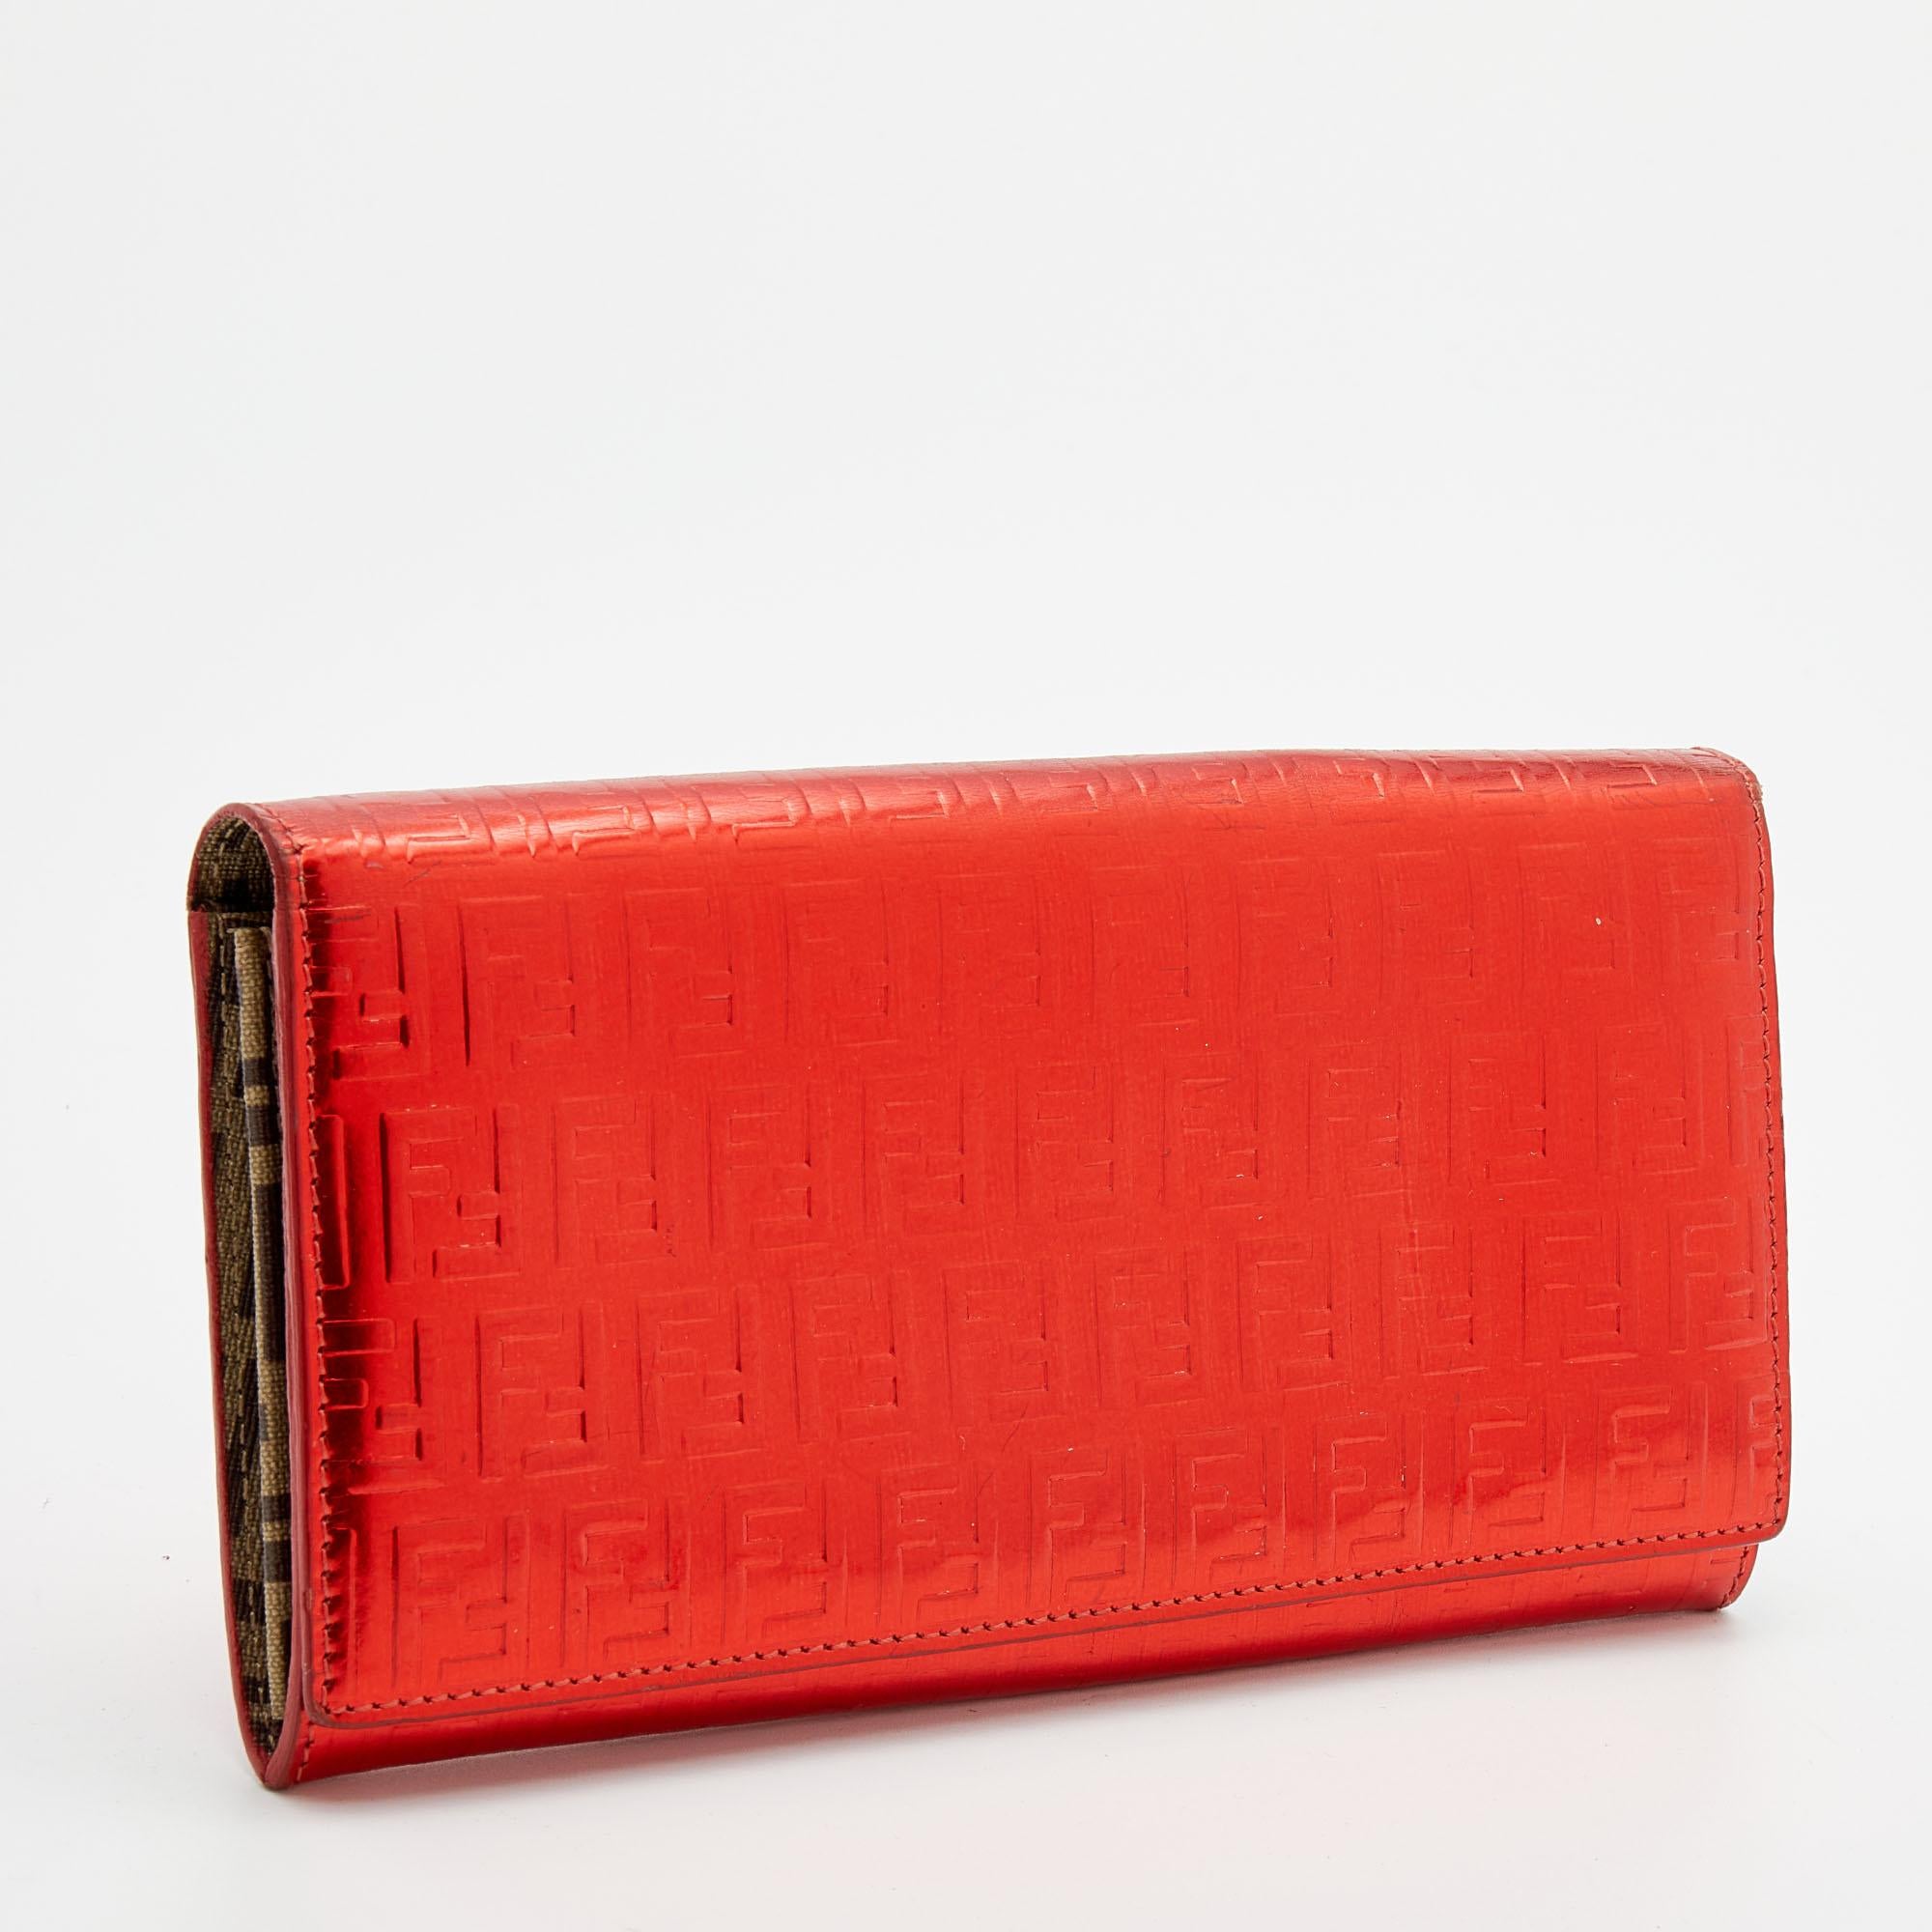 Fendi Red Zucchino Patent Leather Flap Wallet For Sale 2